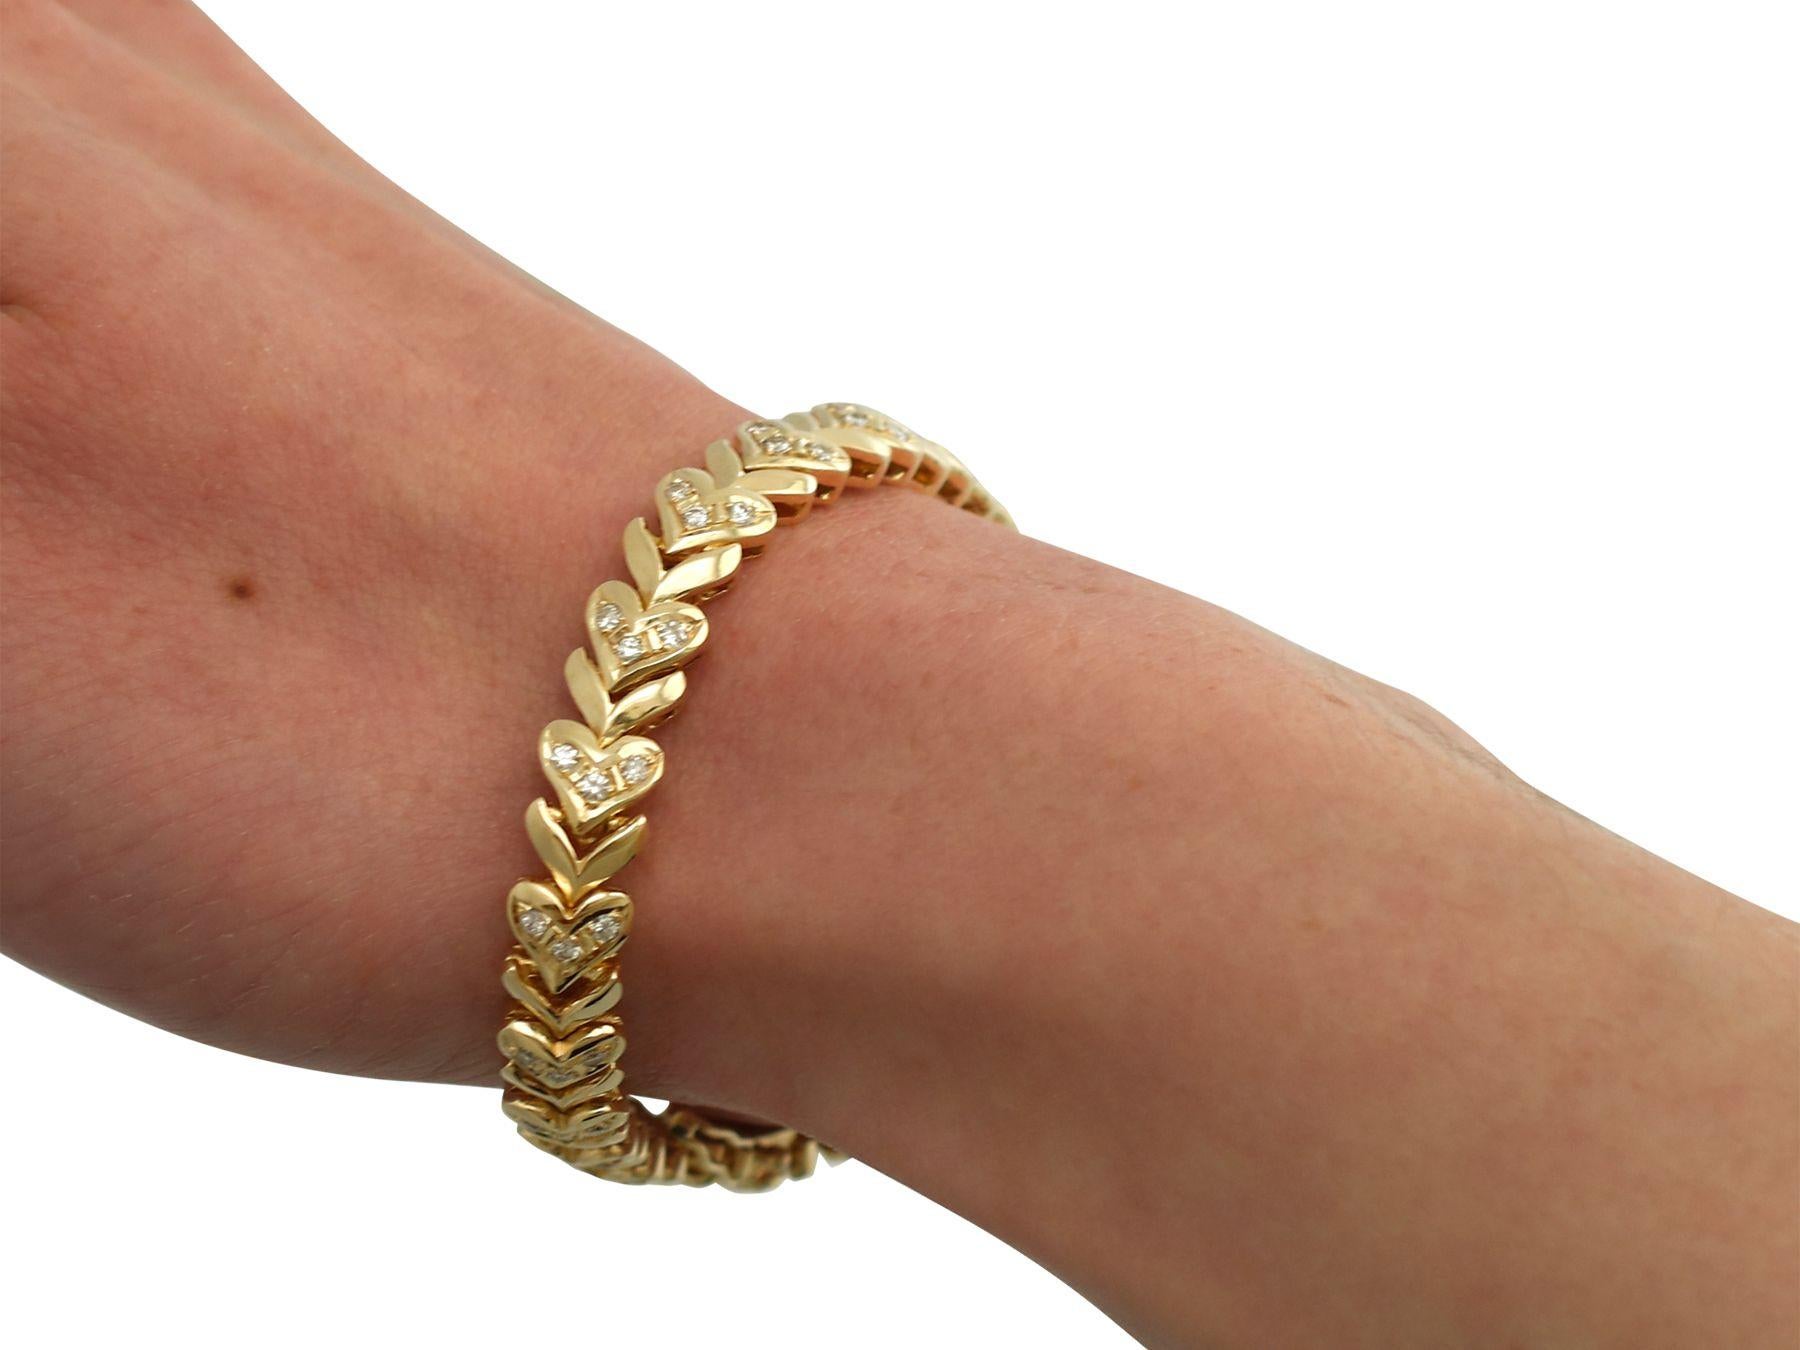 Vintage 1.82ct Diamond and Yellow Gold Bracelet Circa 1980 For Sale 3